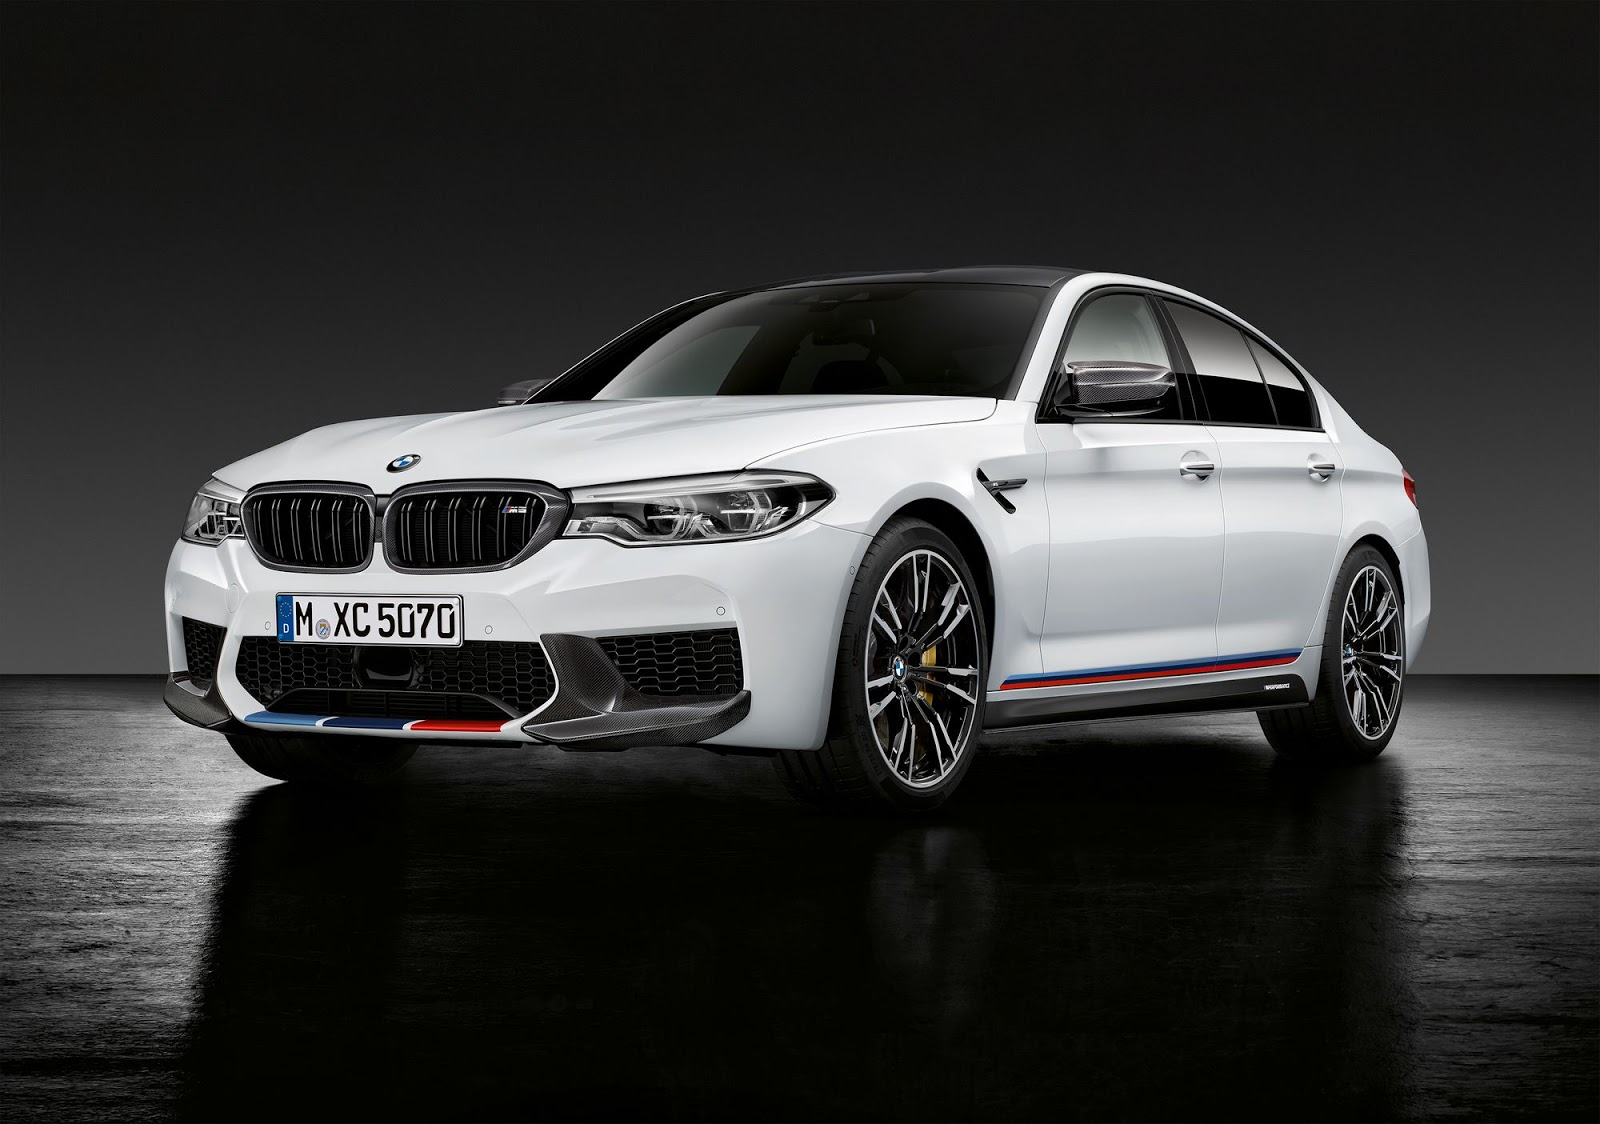 New M Performance Parts For Updated M5 - BimmerLife